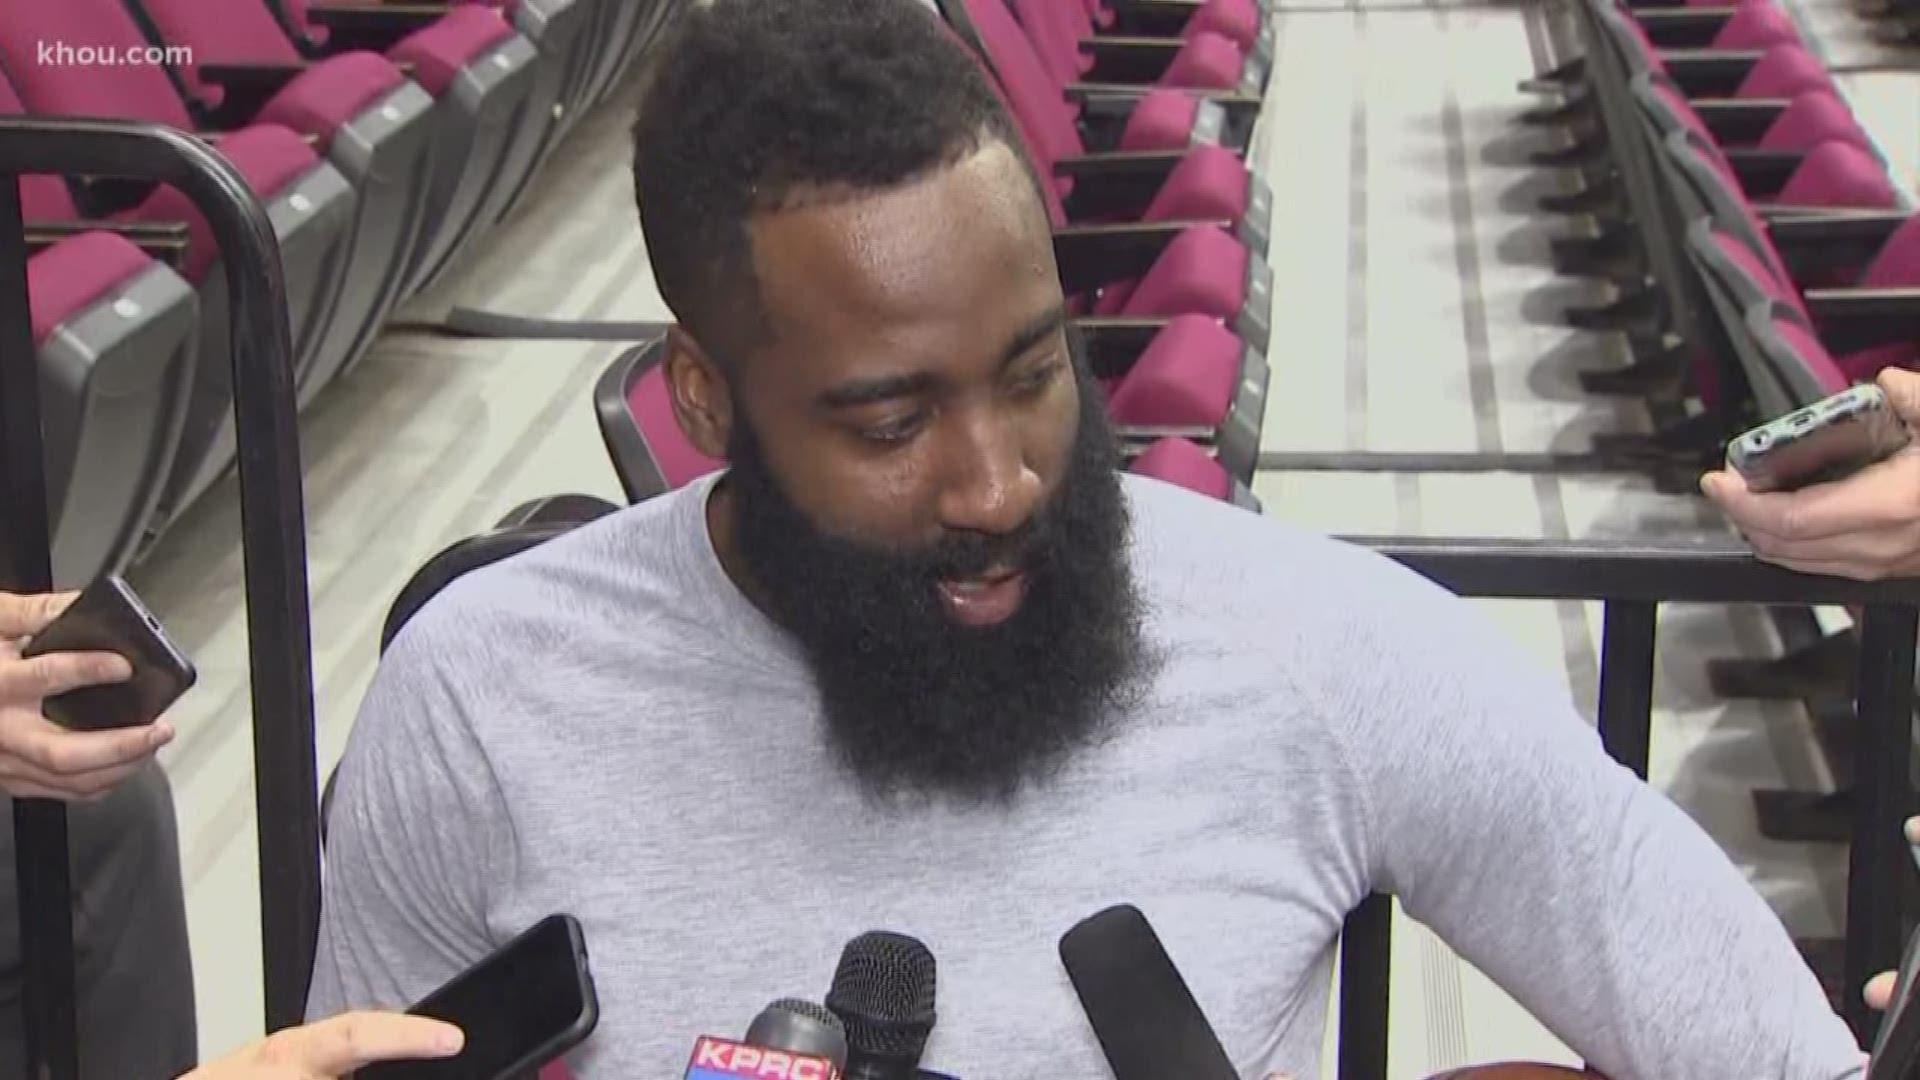 The Houston Rockets and James Harden, despite his eye injury, are gearing up for Saturday's Game 3 of the Western Conference semifinals against the Golden State Warriors.